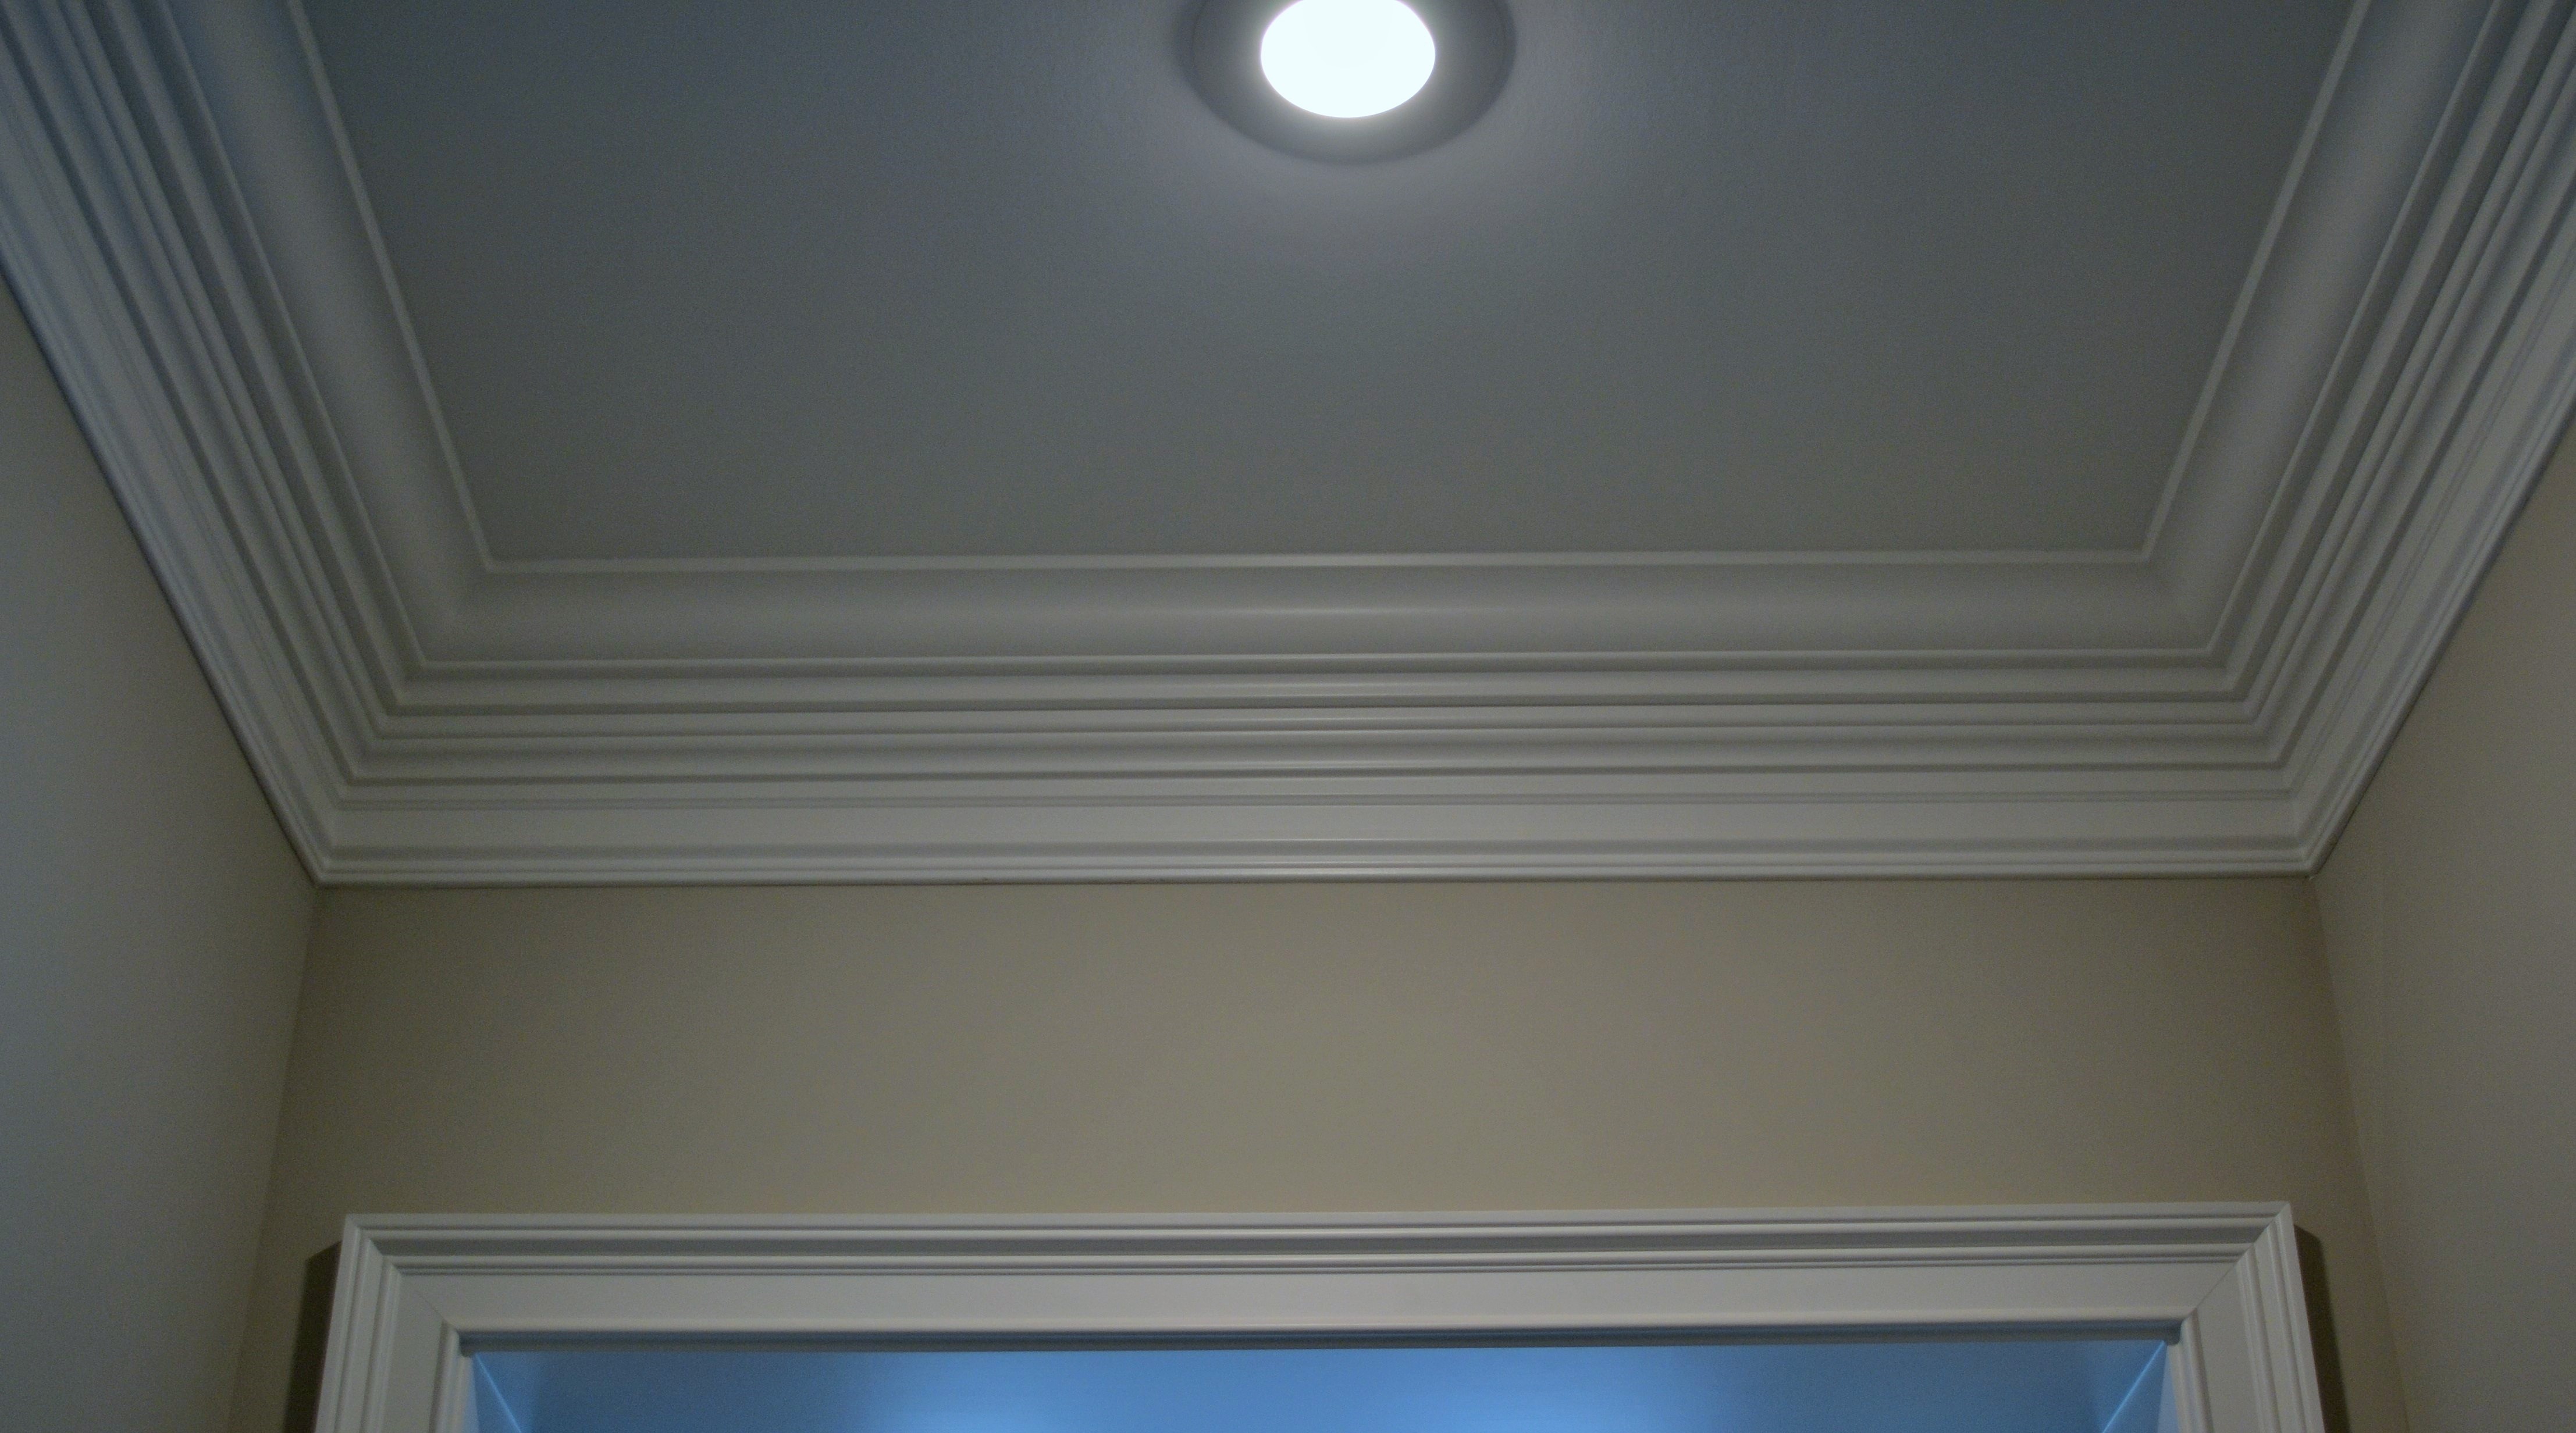 HCW7 7" Crown Molding with Crown Enhancer